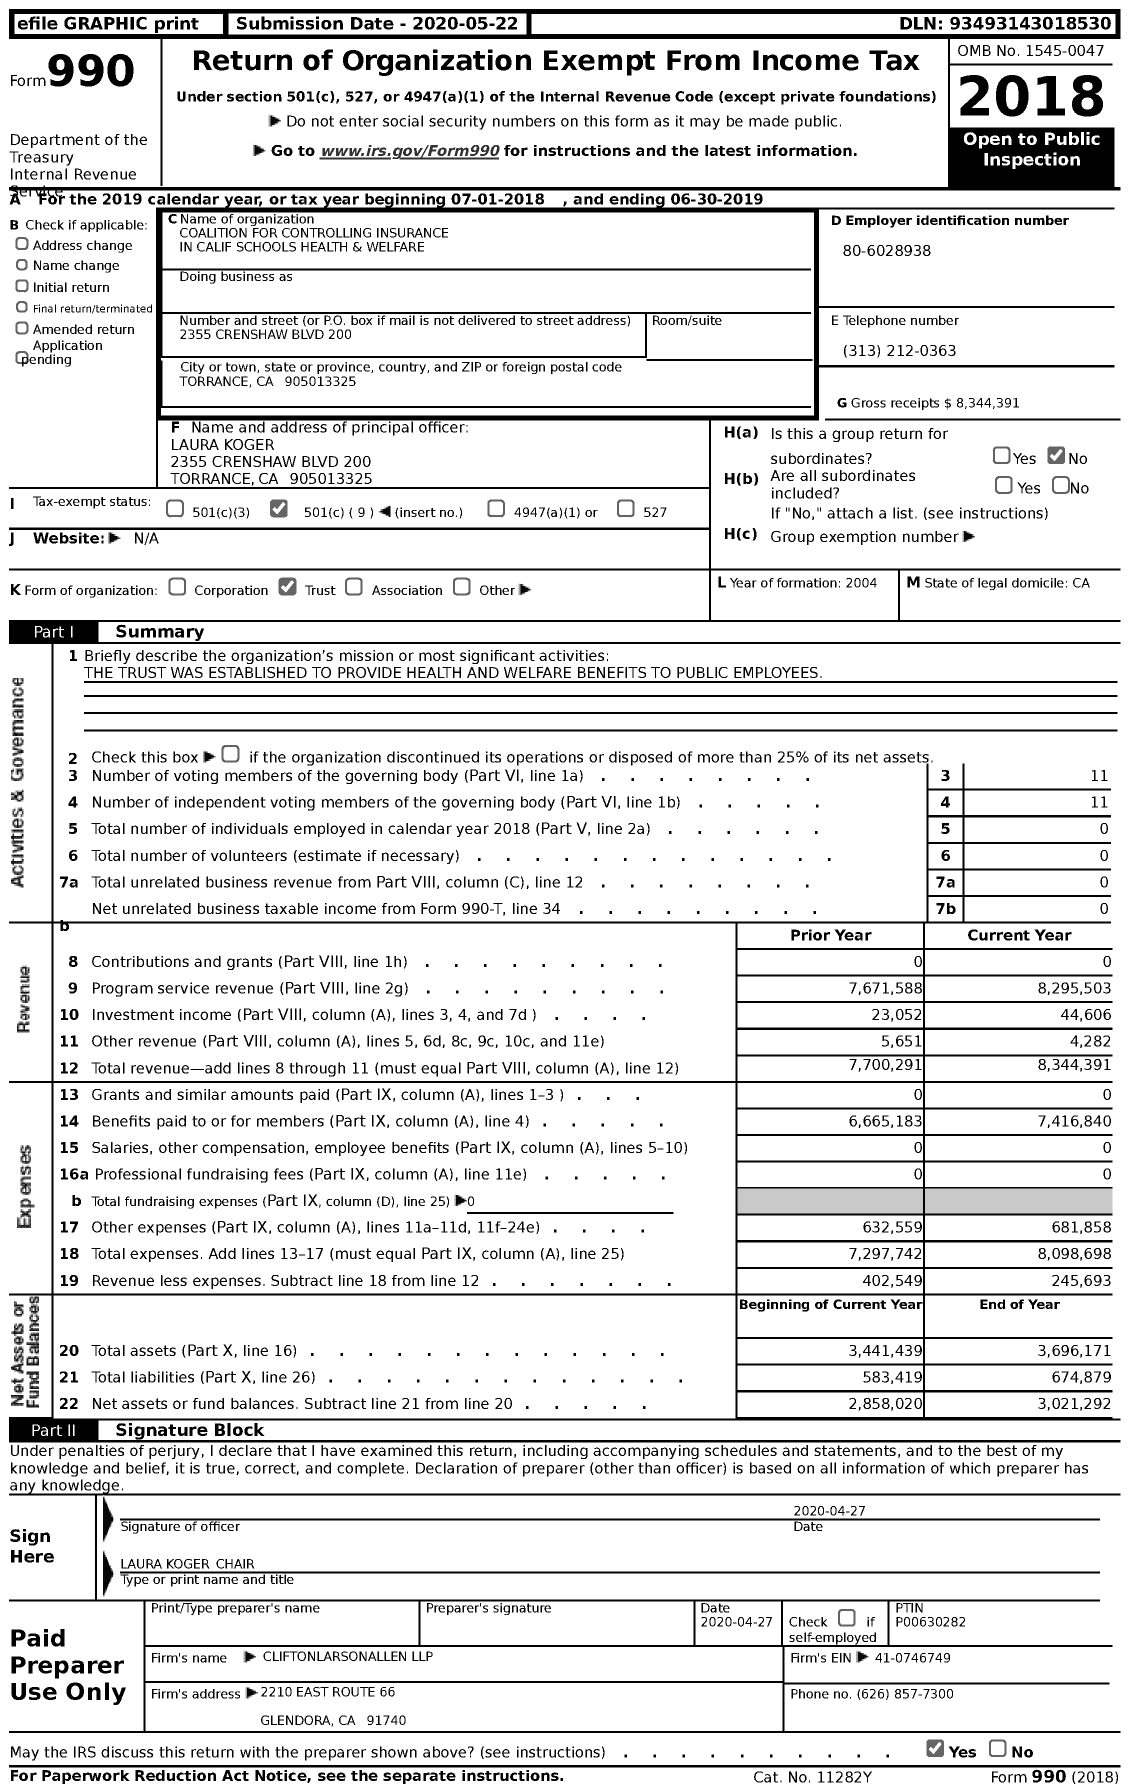 Image of first page of 2018 Form 990 for Coalition for Controlling Insurance in Calif Schools Health and Welfare